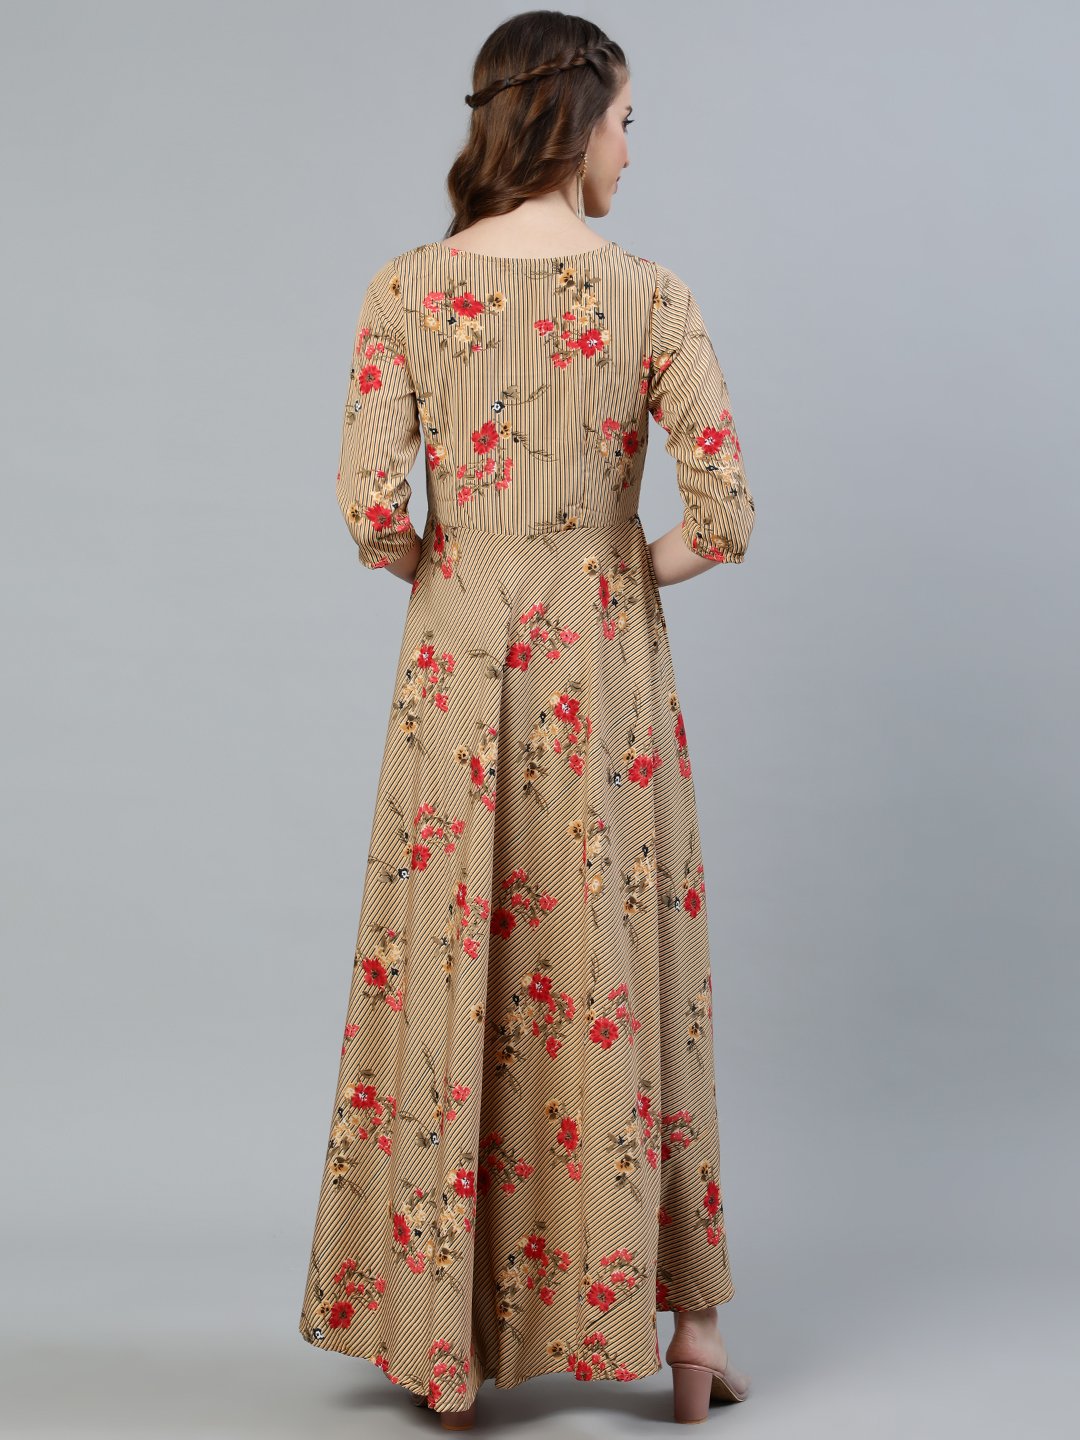 Women's Beige Printed Maxi Dress With Three Quarter Sleeves - Nayo Clothing